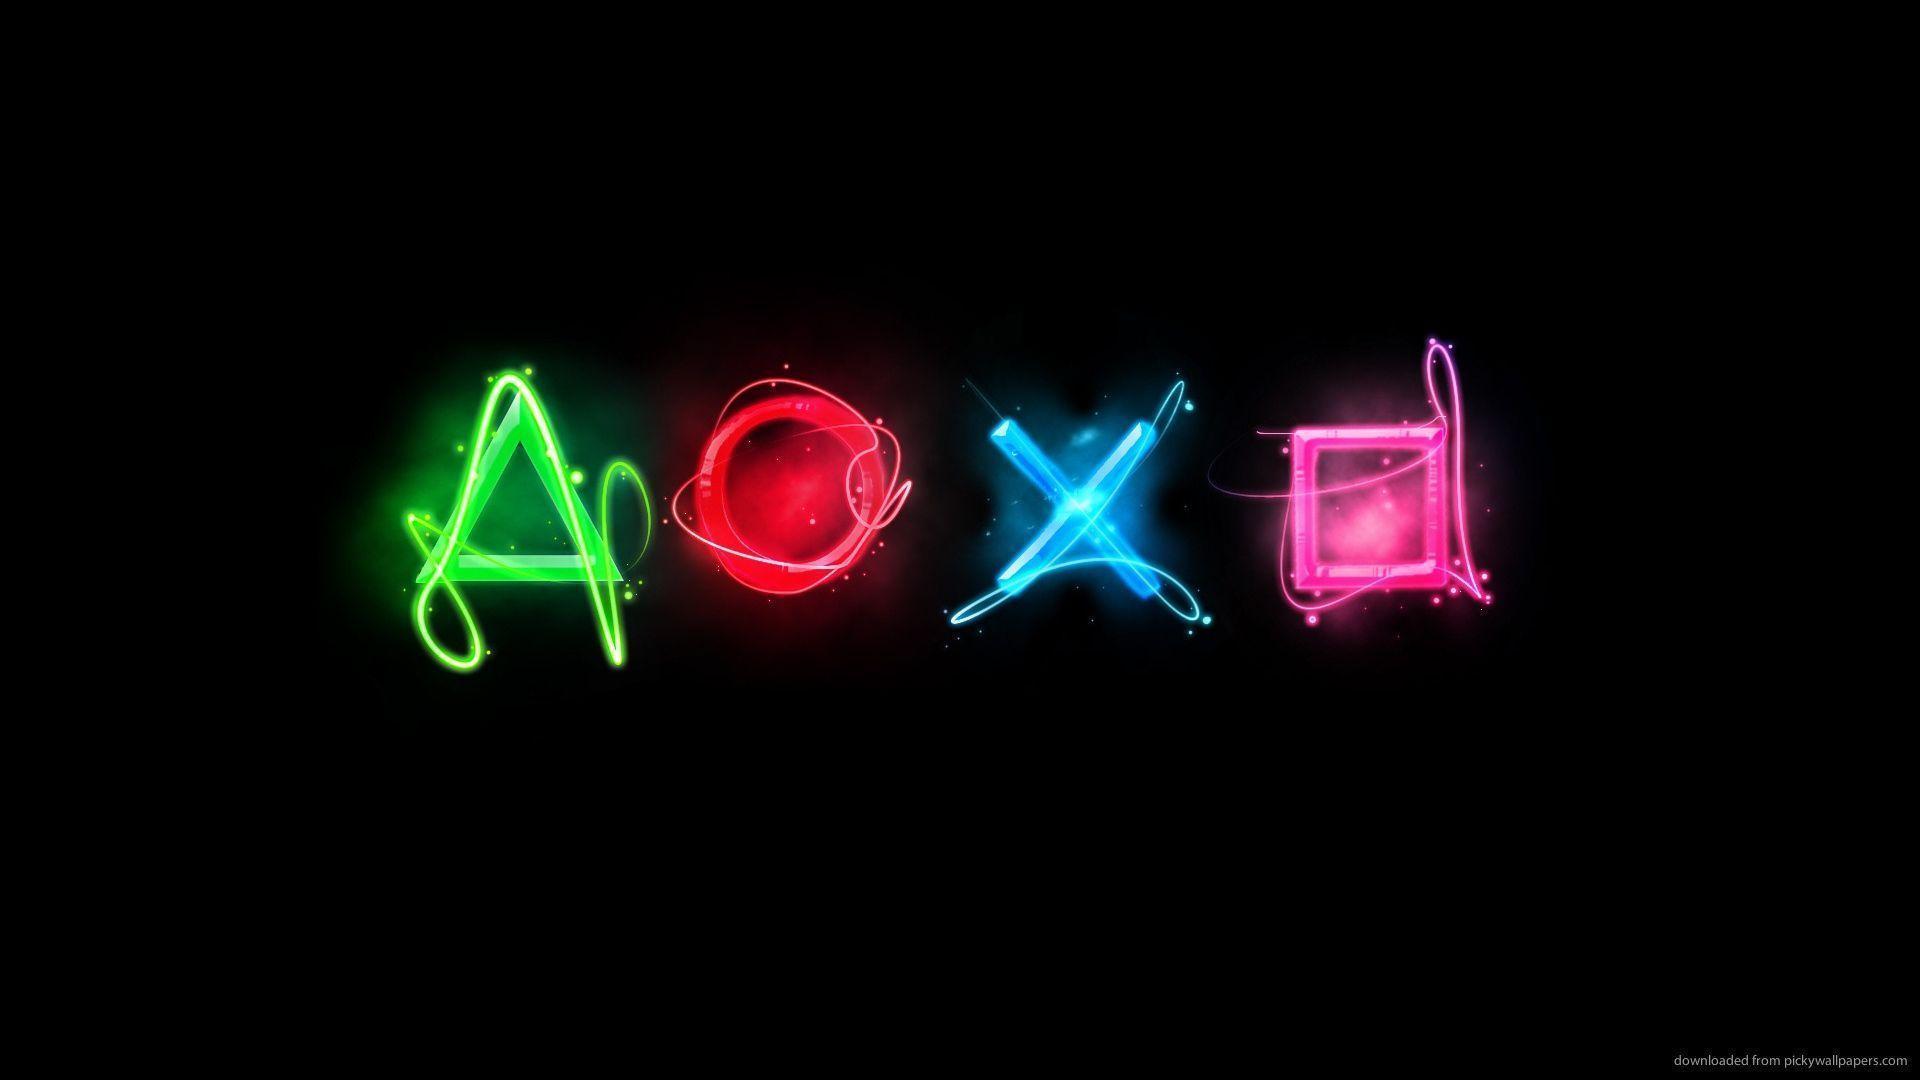 Download 1920x1080 Playstation Control Symbols On Black Wallpapers